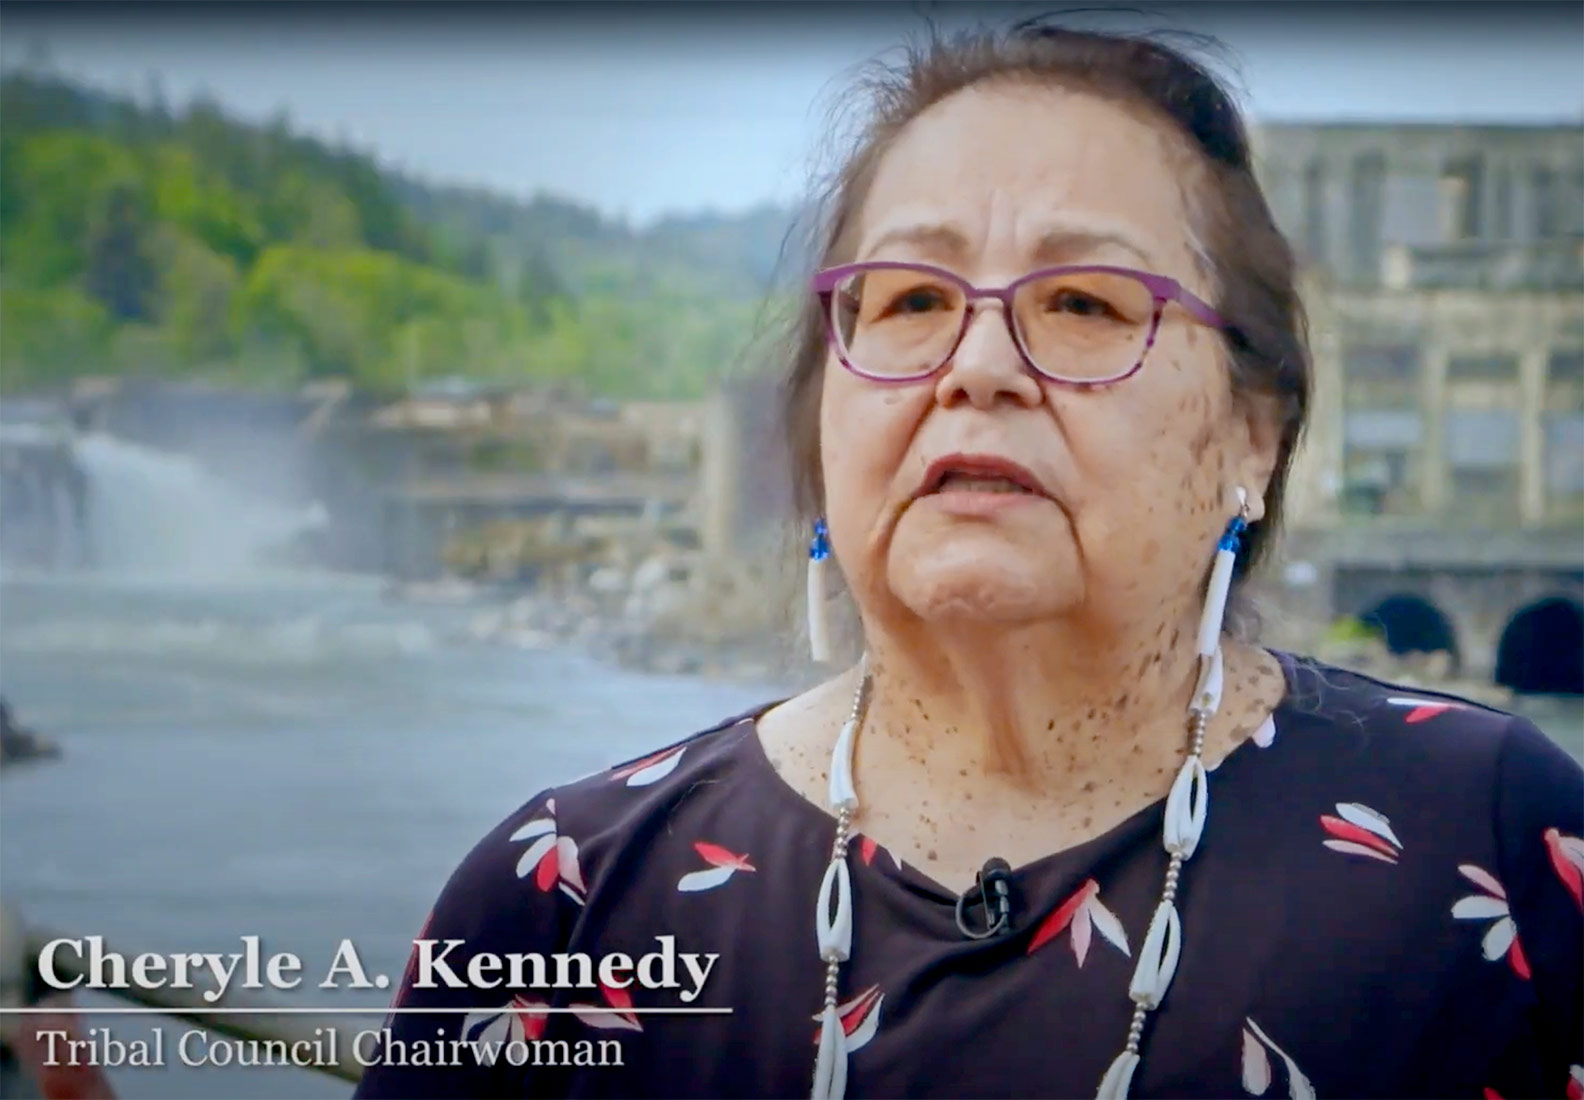 Video still depicting Cheryle Kennedy, tribal council chairwoman of the Confederated Tribes of Grand Ronde.